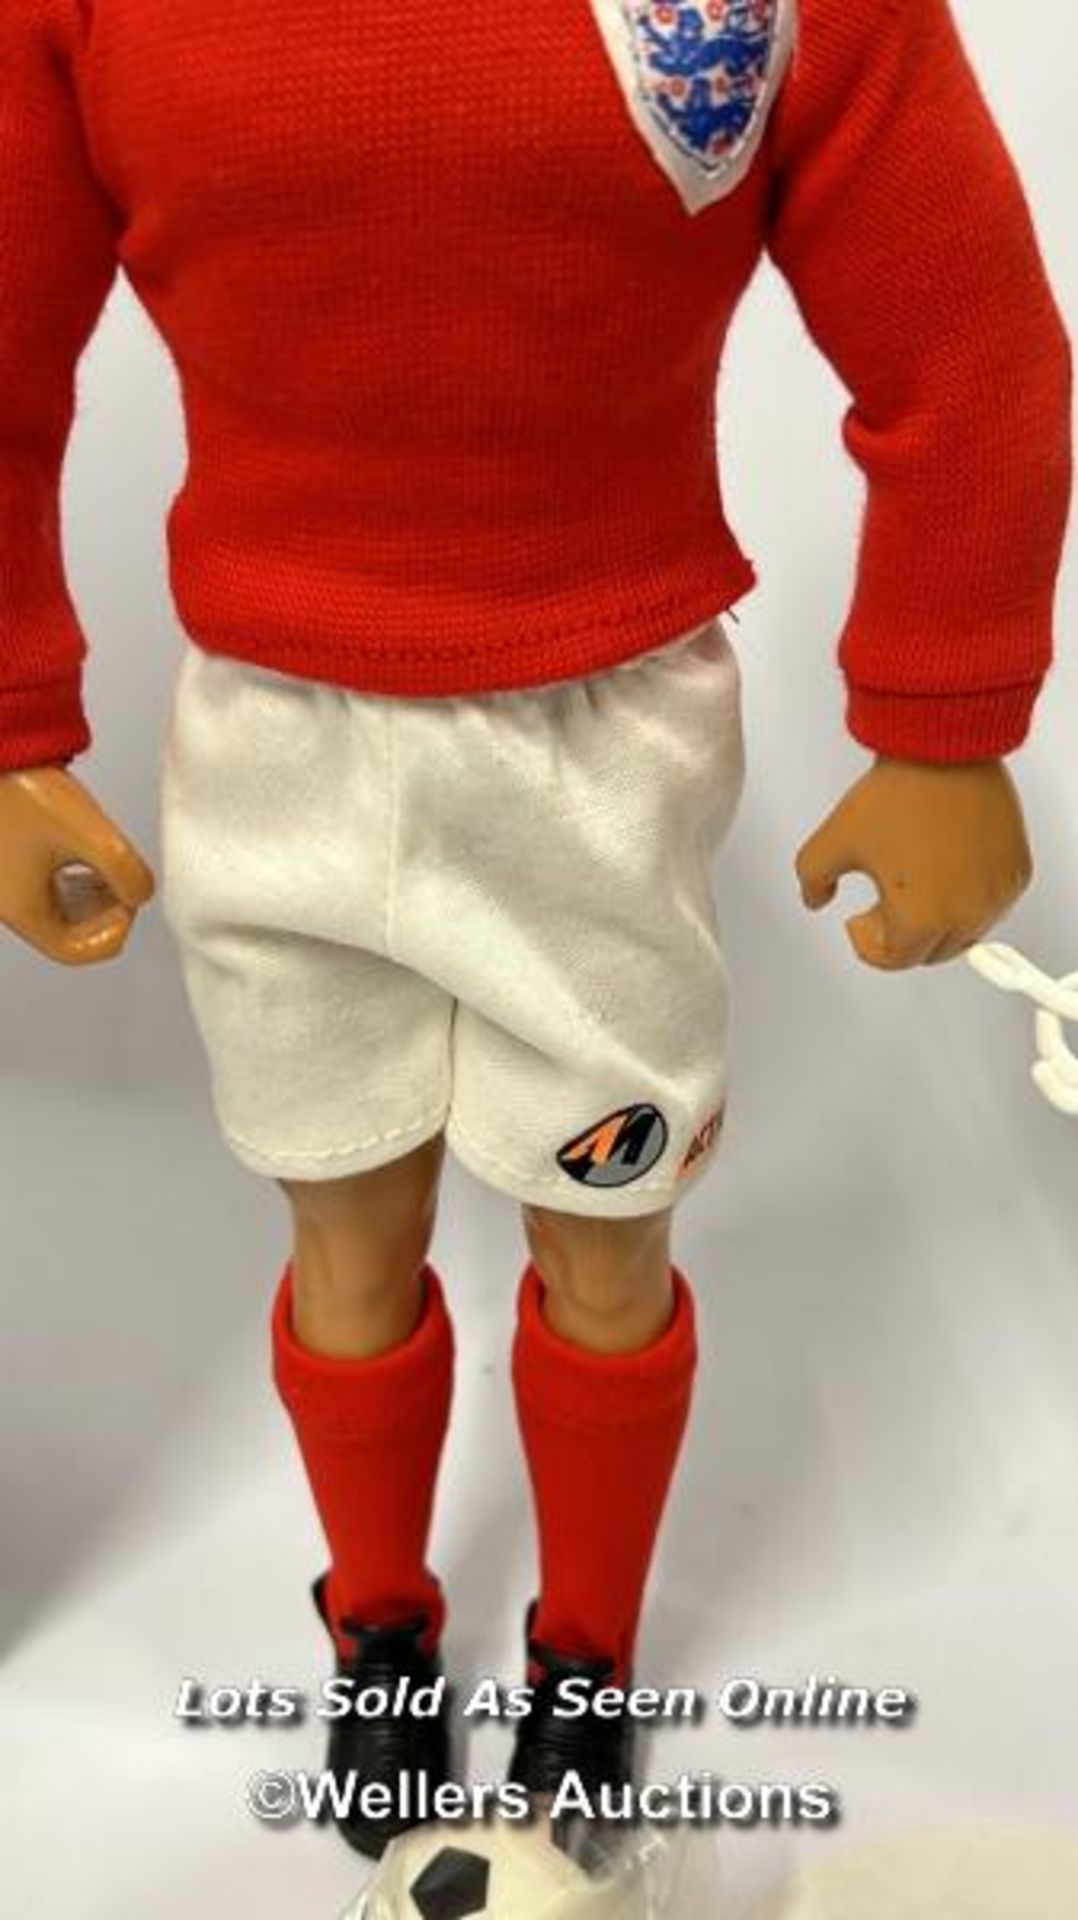 Special edition 1966 world cup Action Man, limited edition 59/1000, near mint condition, 1996 / AN2 - Image 3 of 10